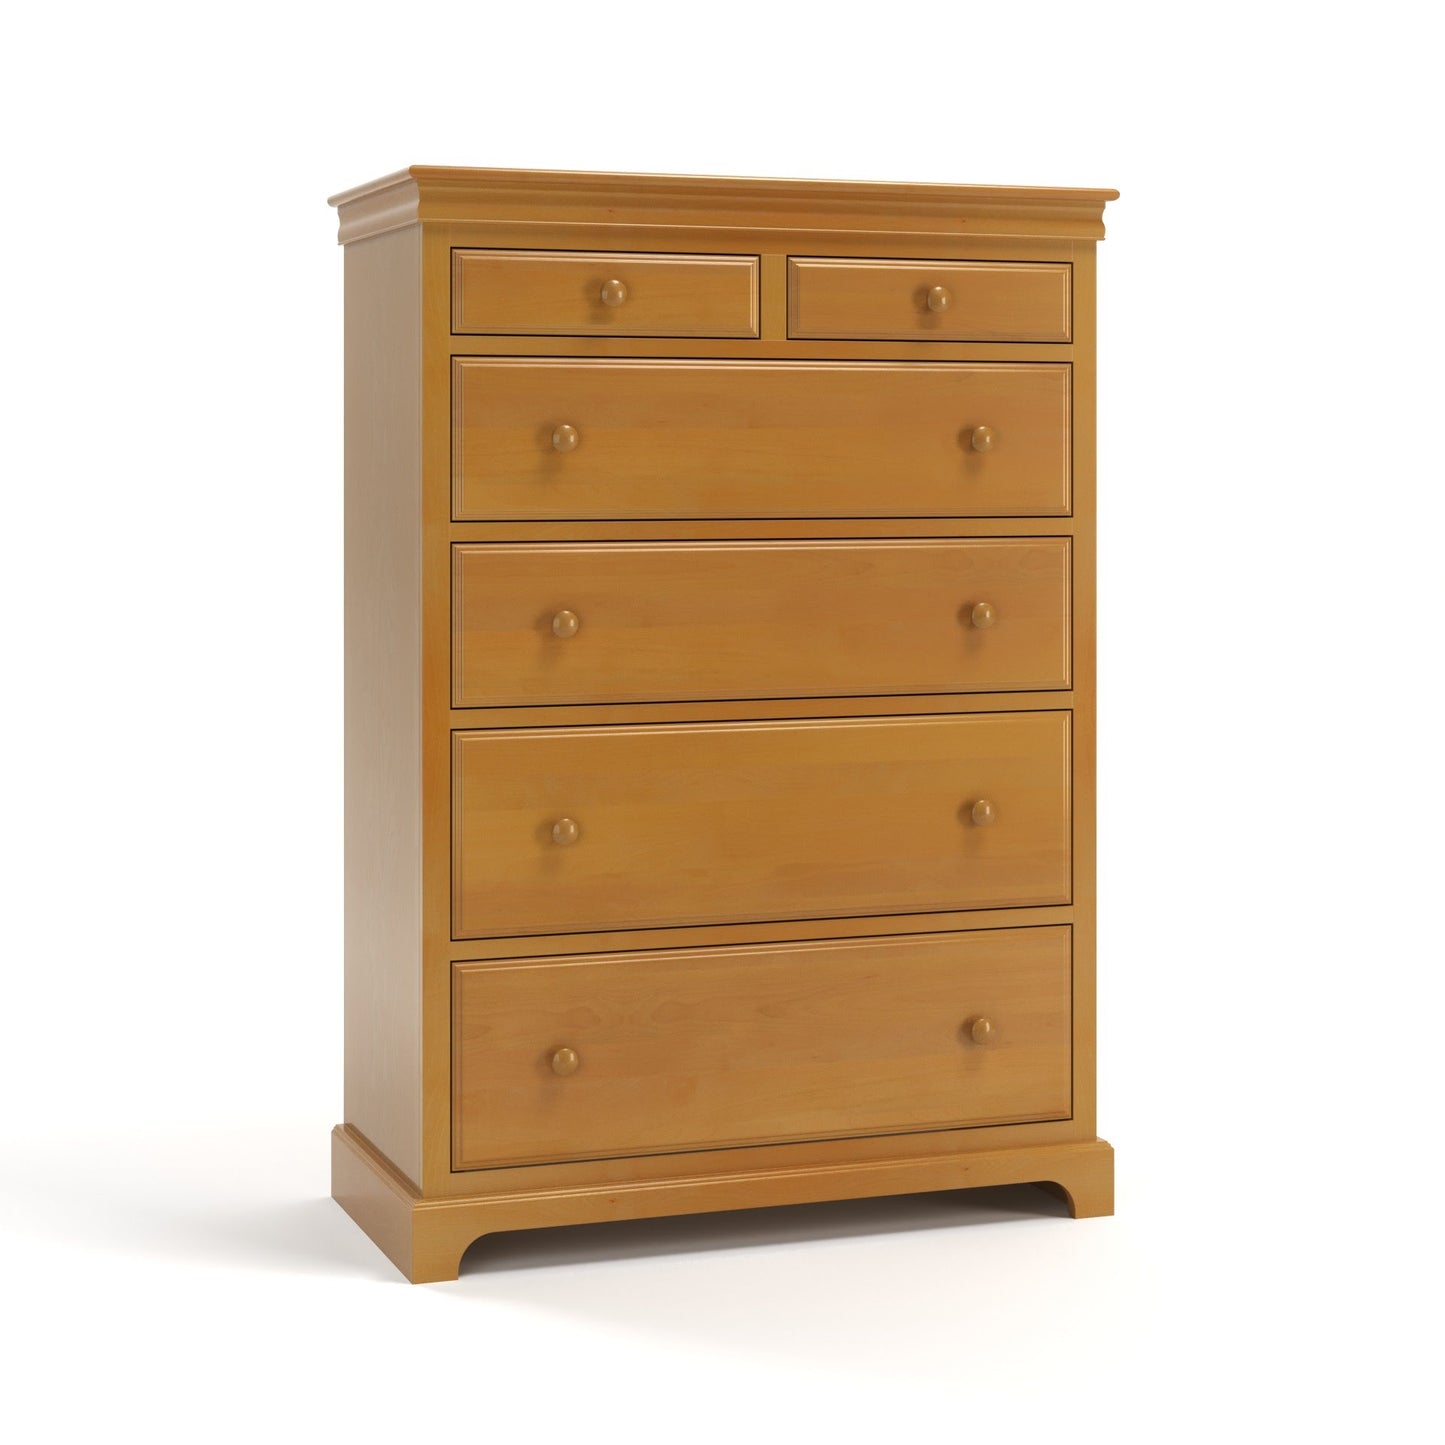 Acadia Madison Chest with Split Top Drawer is built in birch and features crown moulding and 6 drawers. The top drawers are small, middle two are medium, and bottom two are large.  Pictured in Autumn Gold finish.